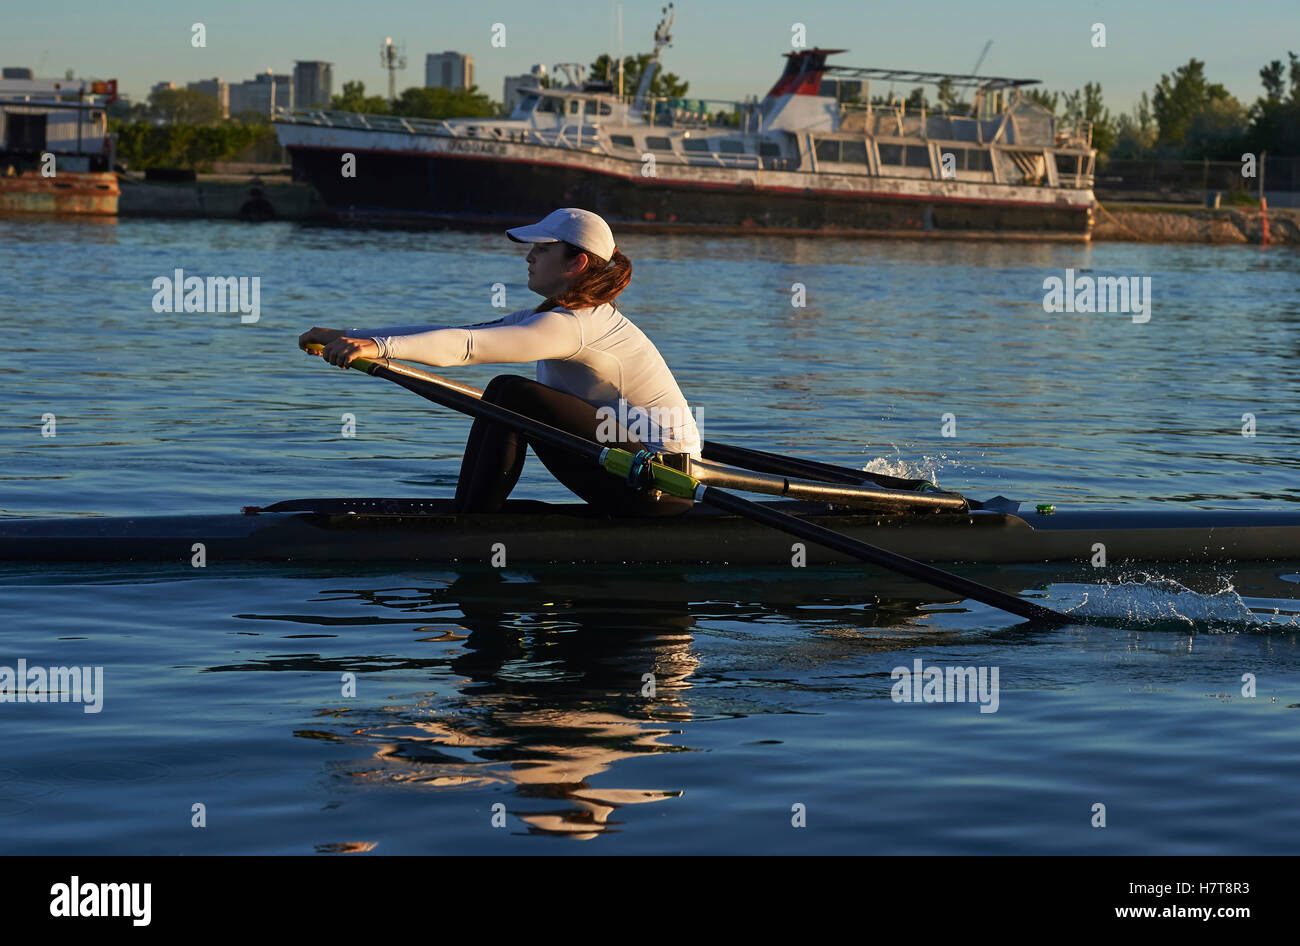 Young woman in a single scull, Hanlan Boat Club in the harbour; Toronto, Ontario, Canada Stock Photo